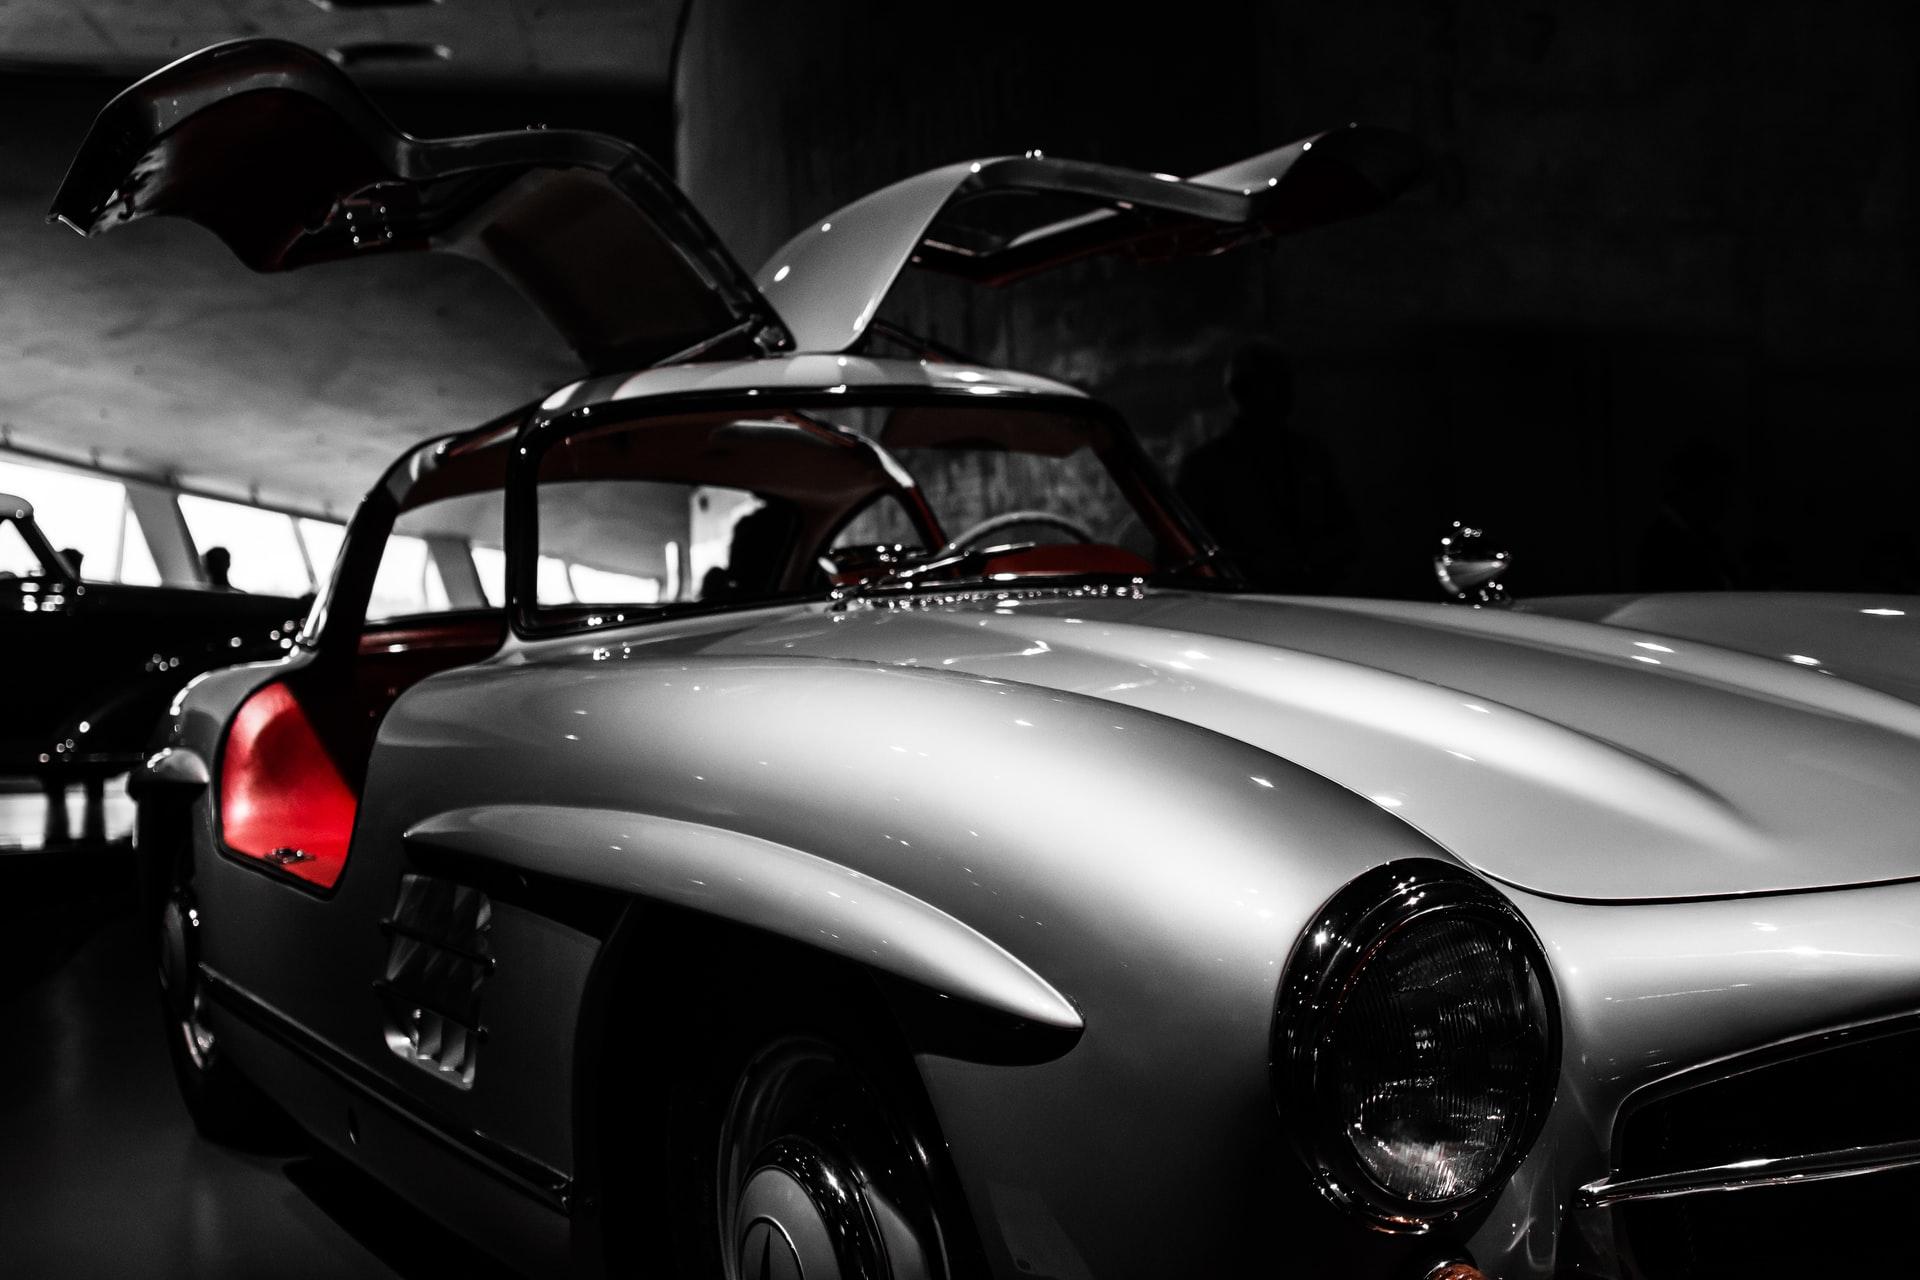 Gullwing doors are named for their wing-like look when open, since they open from the bottom.